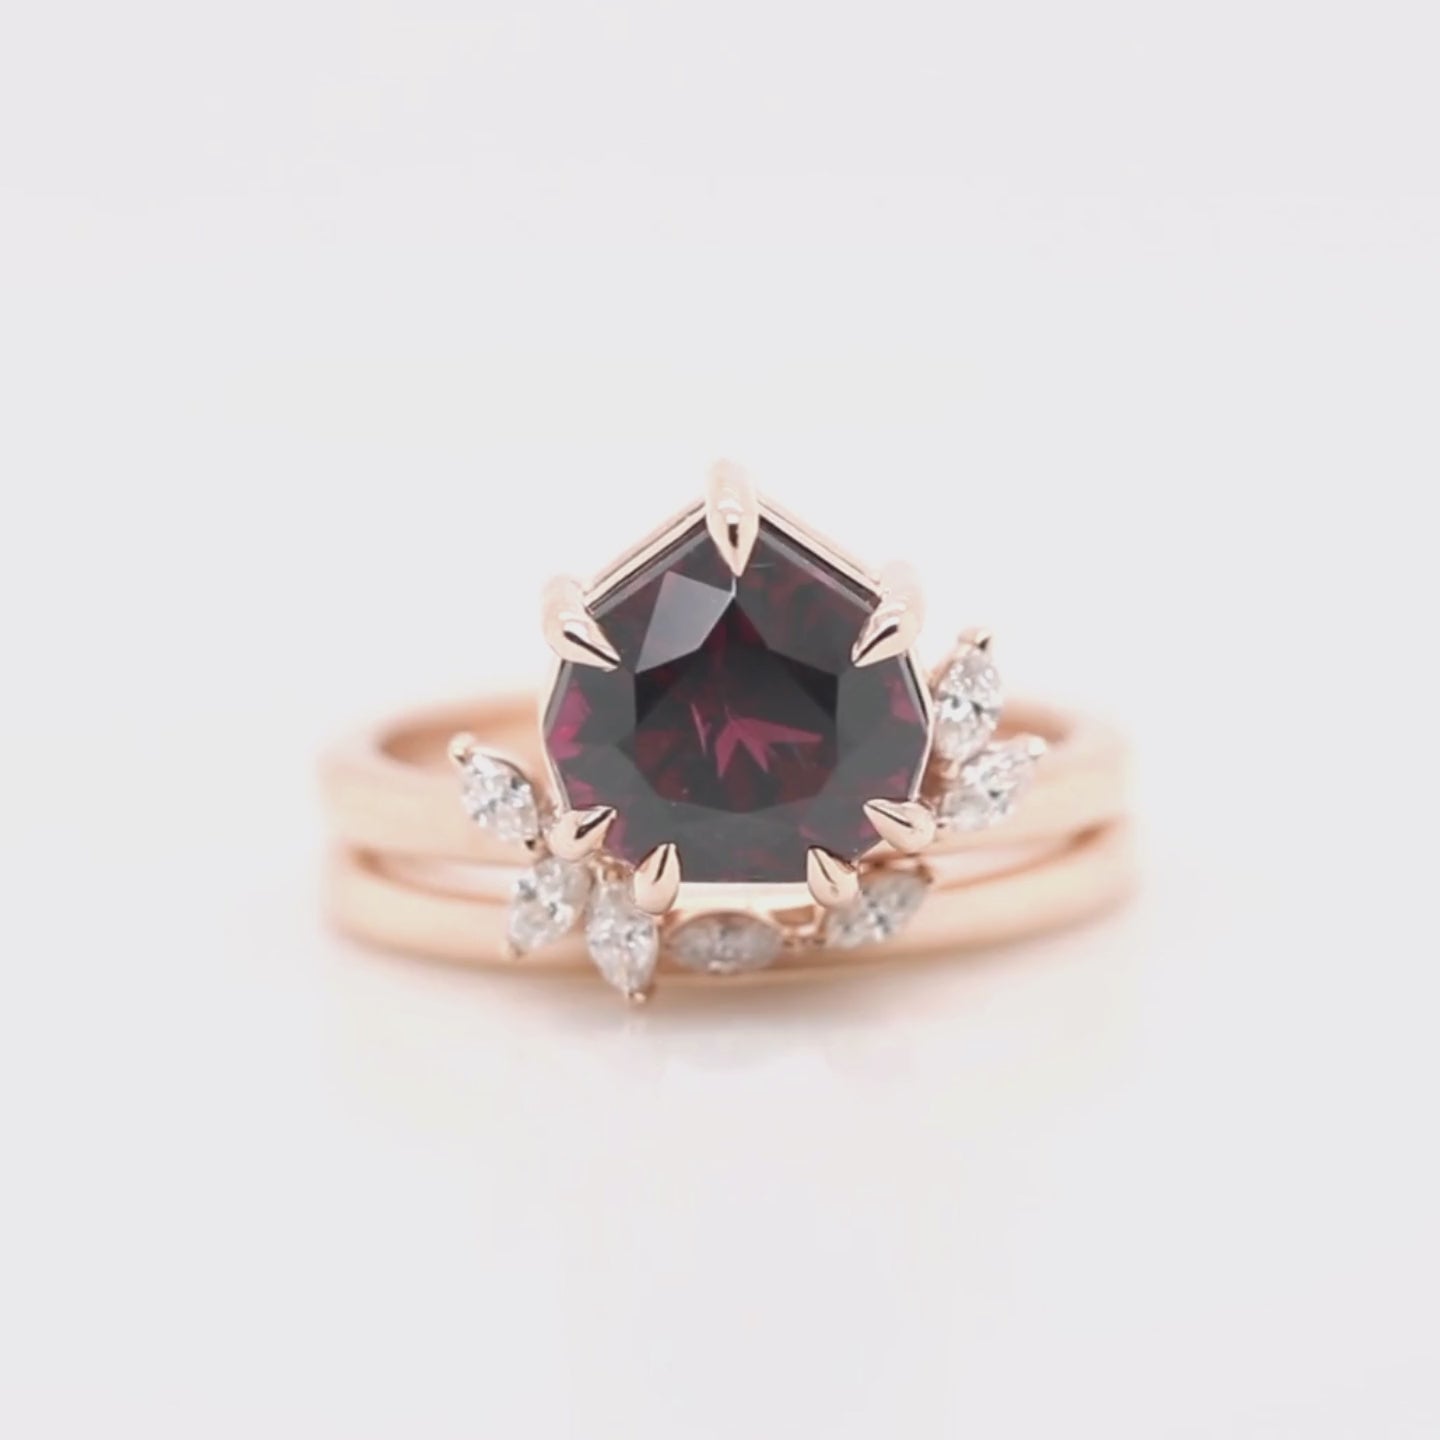 Chantell Ring with a 4.04 Carat Geometric Rhodolite Garnet and White Accent Diamonds in 14k Rose Gold with Matching Band - Ready to Size and Ship